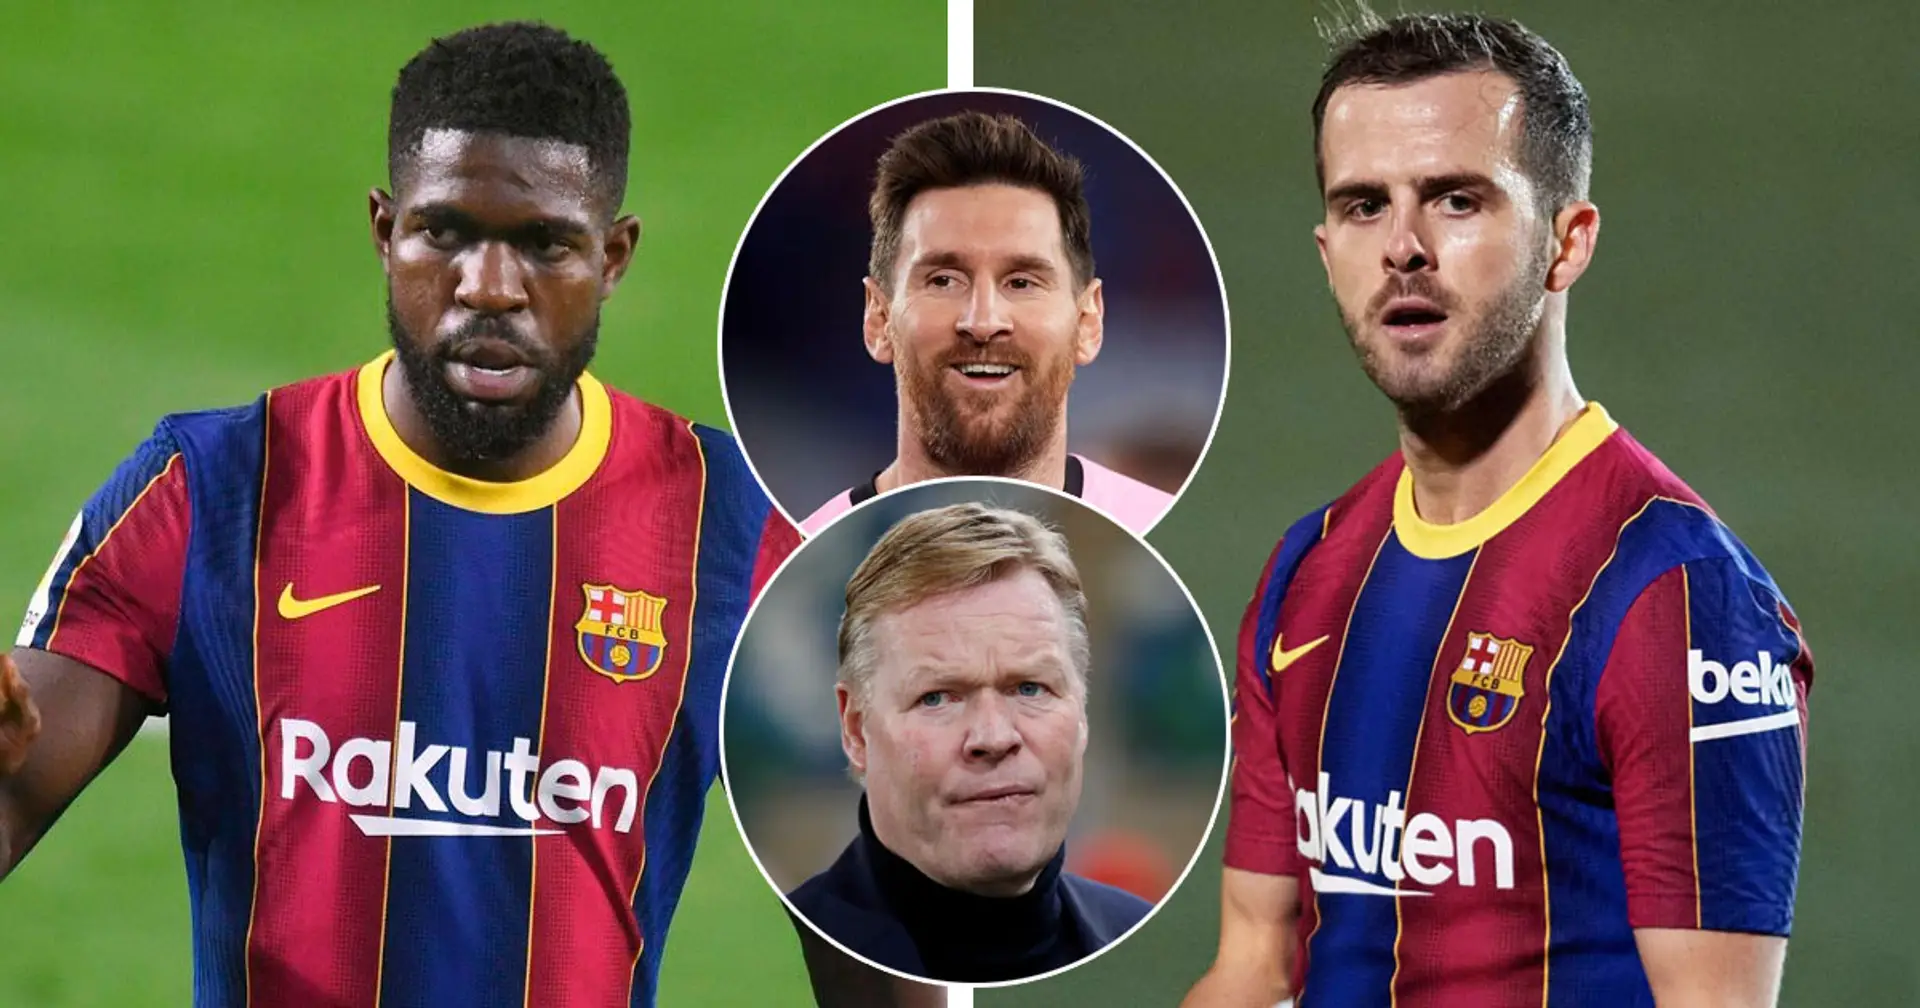 Barca offered to release Umtiti and Pjanic for free, players yet to accept (reliability: 5 stars)